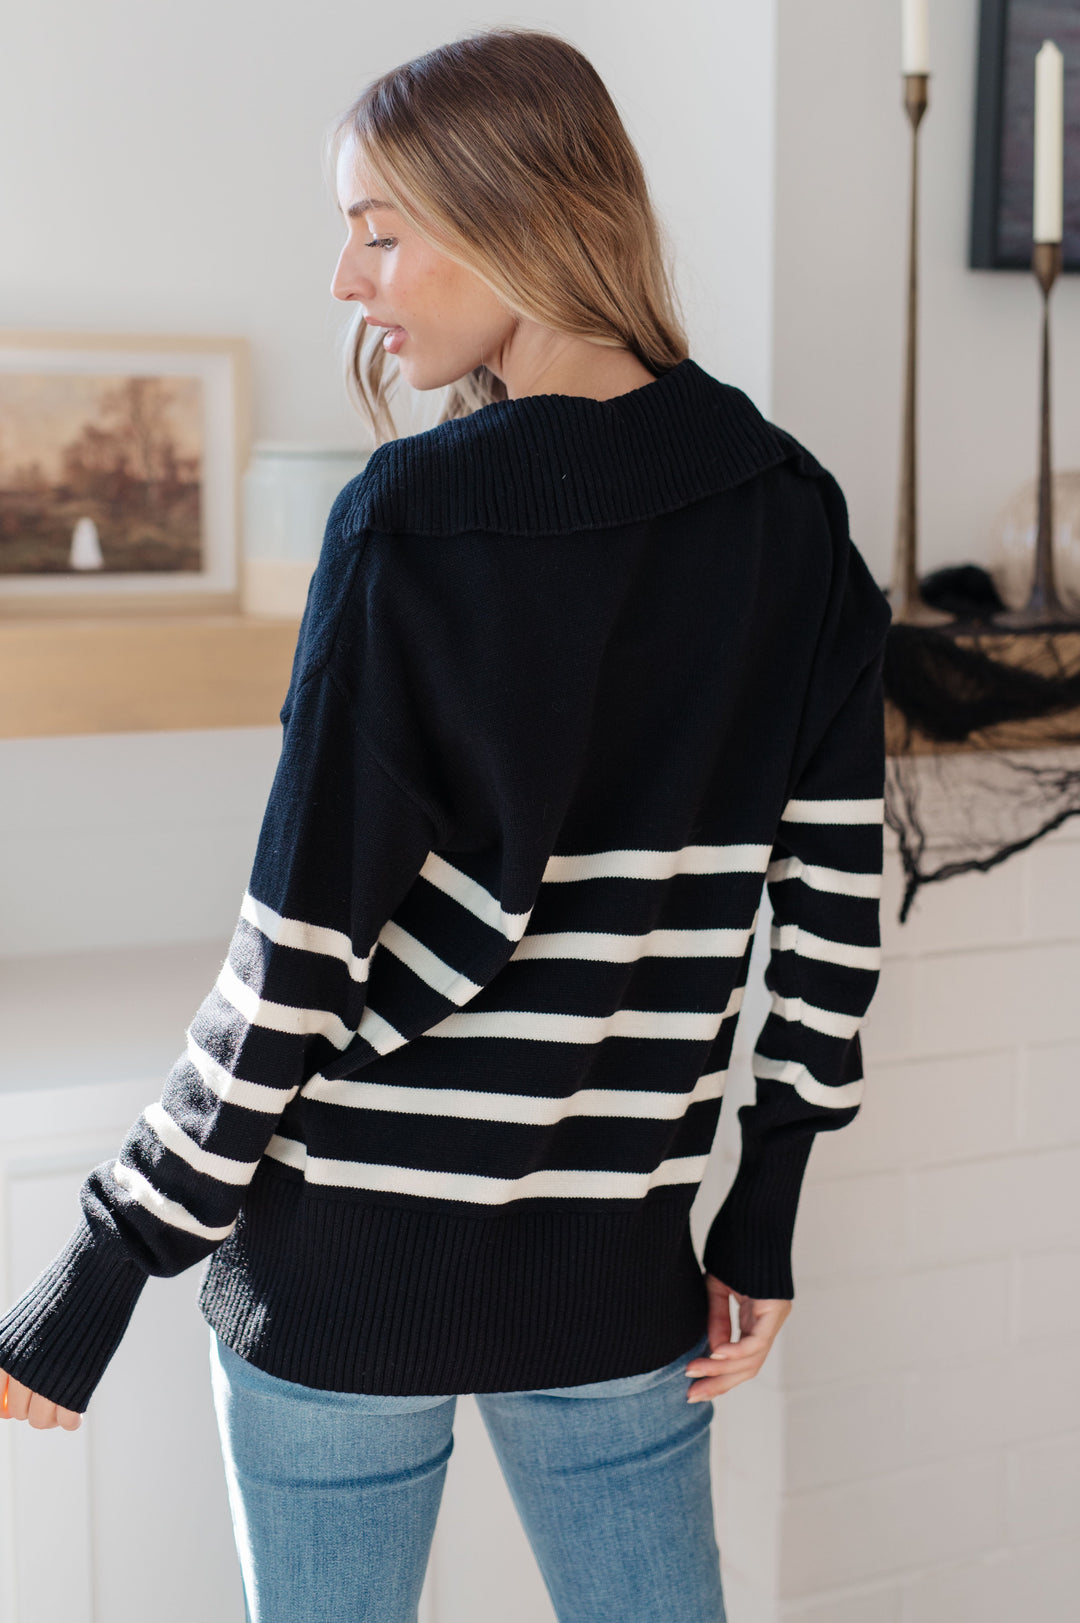 From Here On Out Striped Sweater-Sweaters/Sweatshirts-Inspired by Justeen-Women's Clothing Boutique in Chicago, Illinois